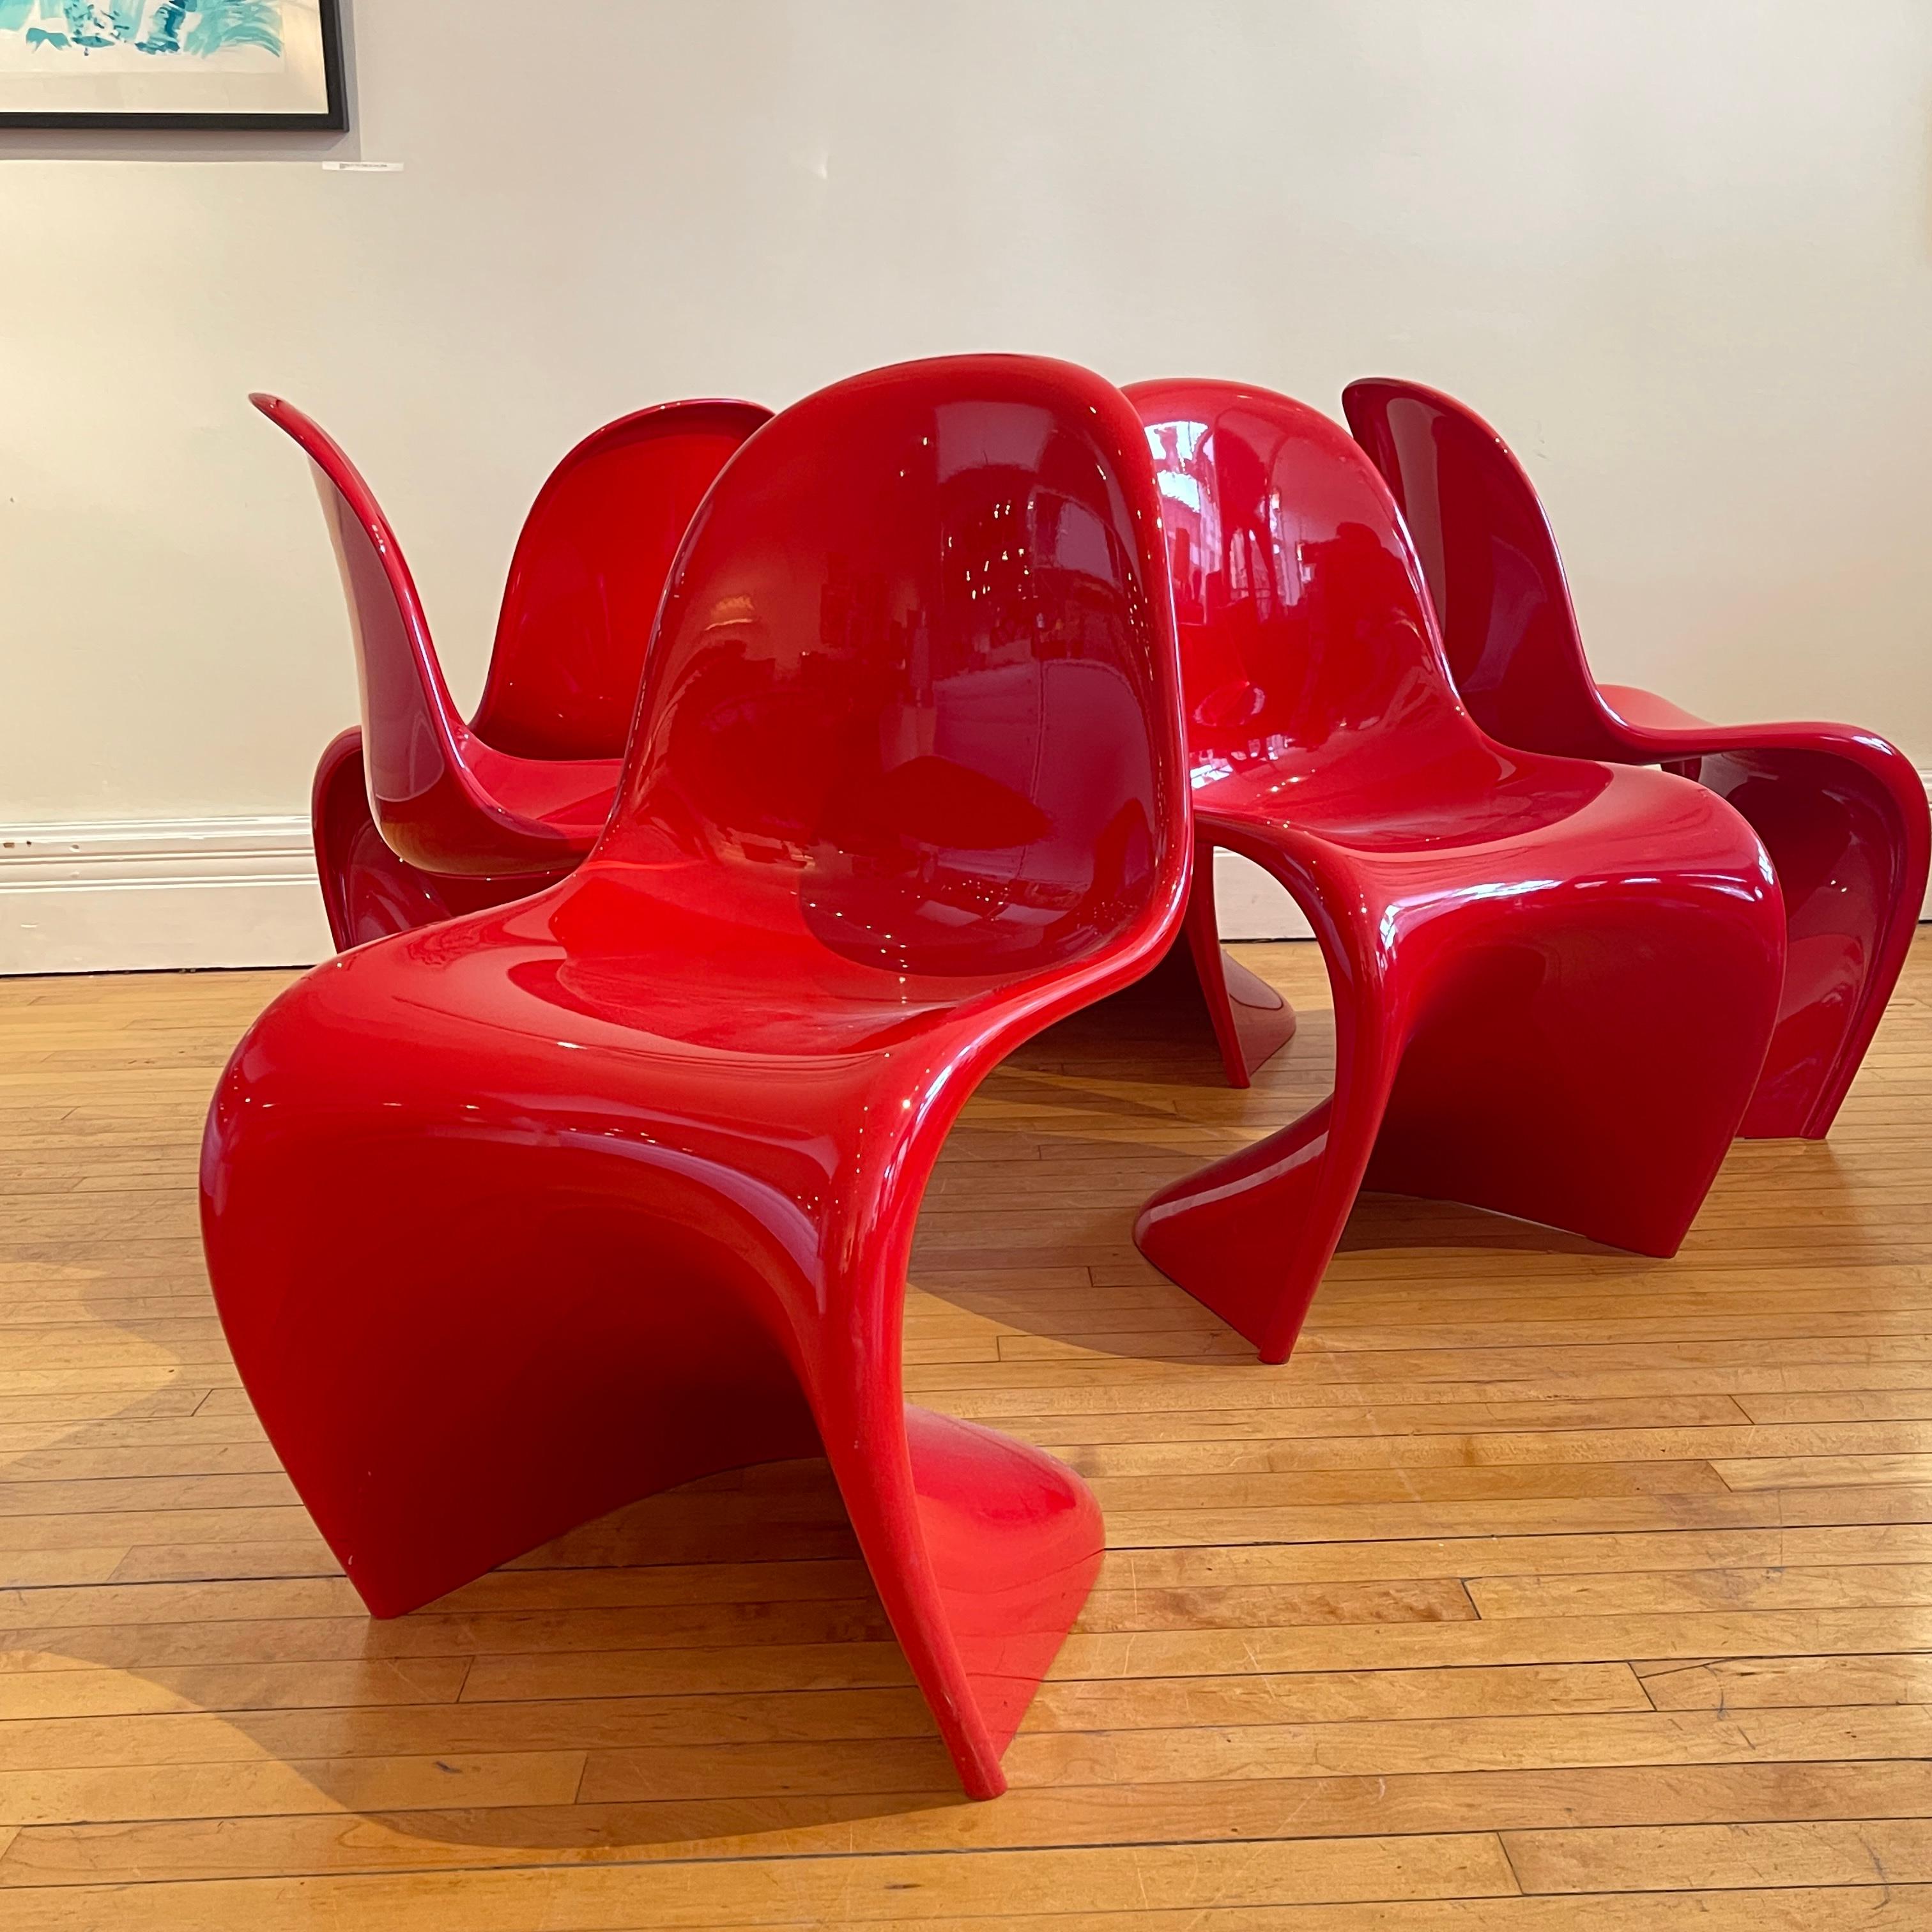 Verner Panton Classic Chairs in Red 2  Available 1